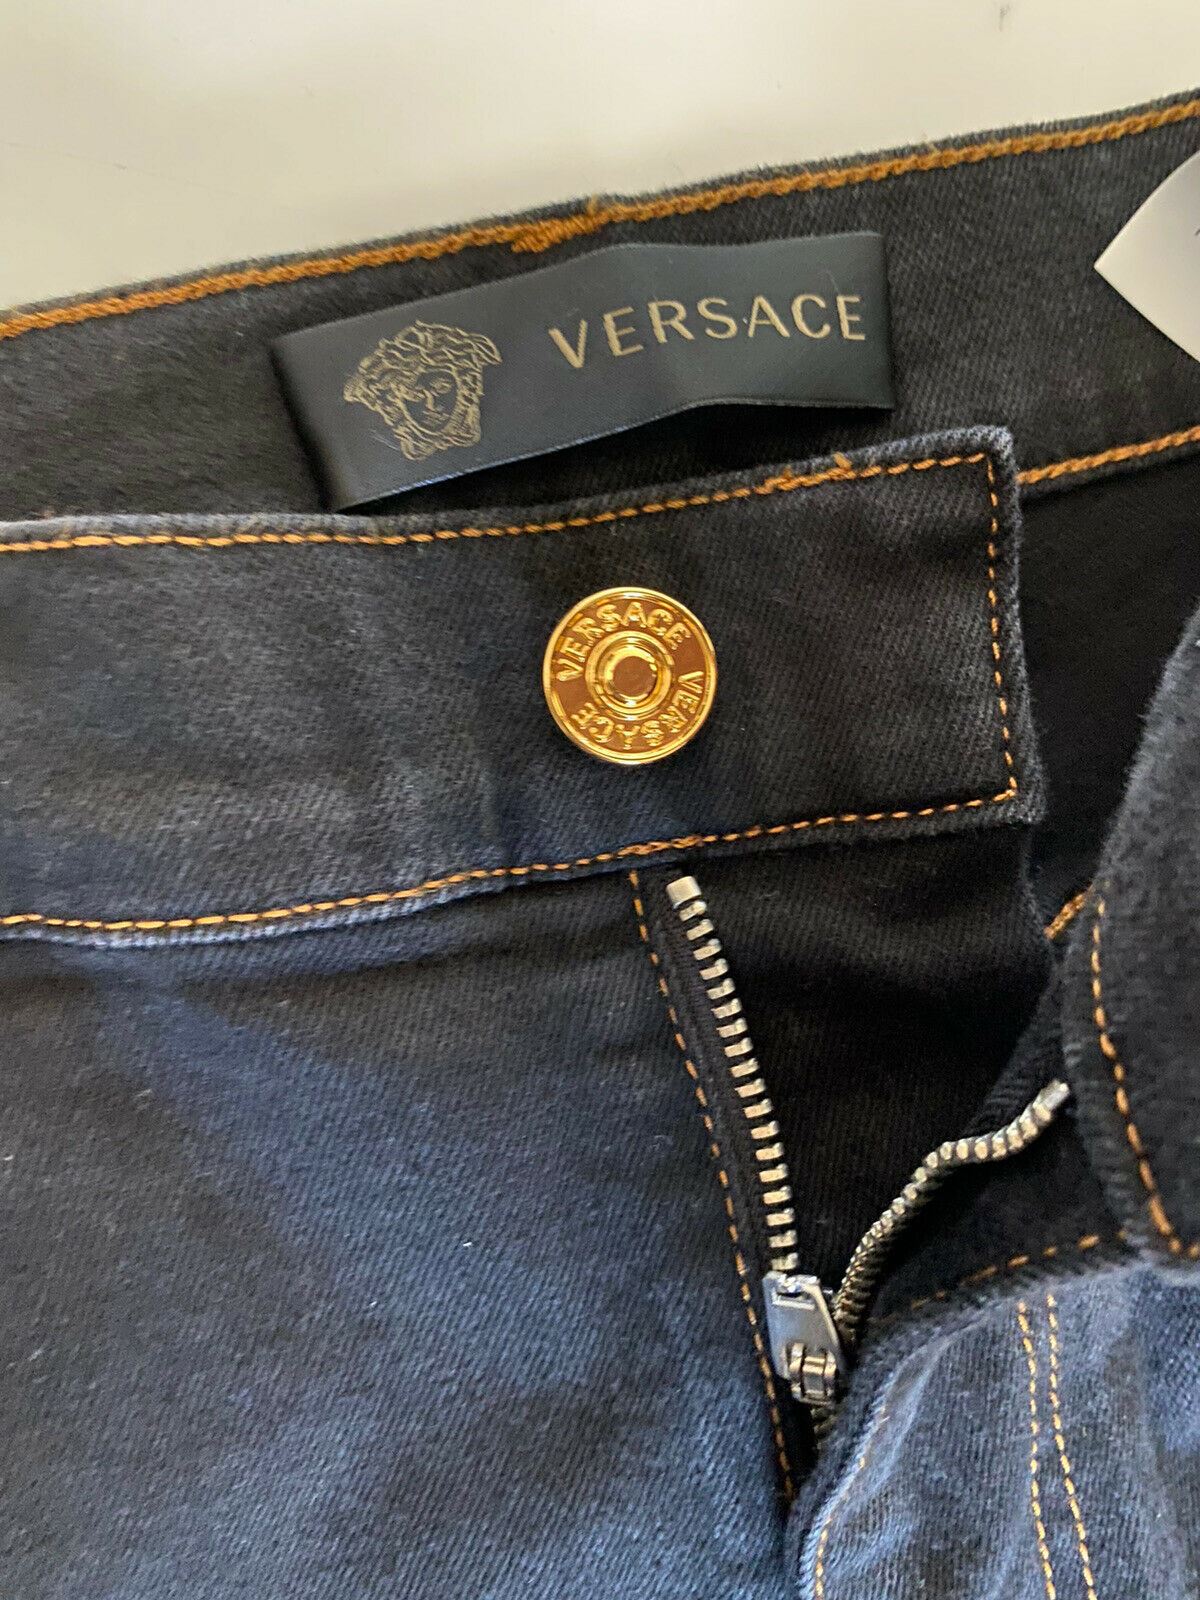 NWT $450 Versace Men's Denim Black Jeans Size 33 US A84998S Made in Italy